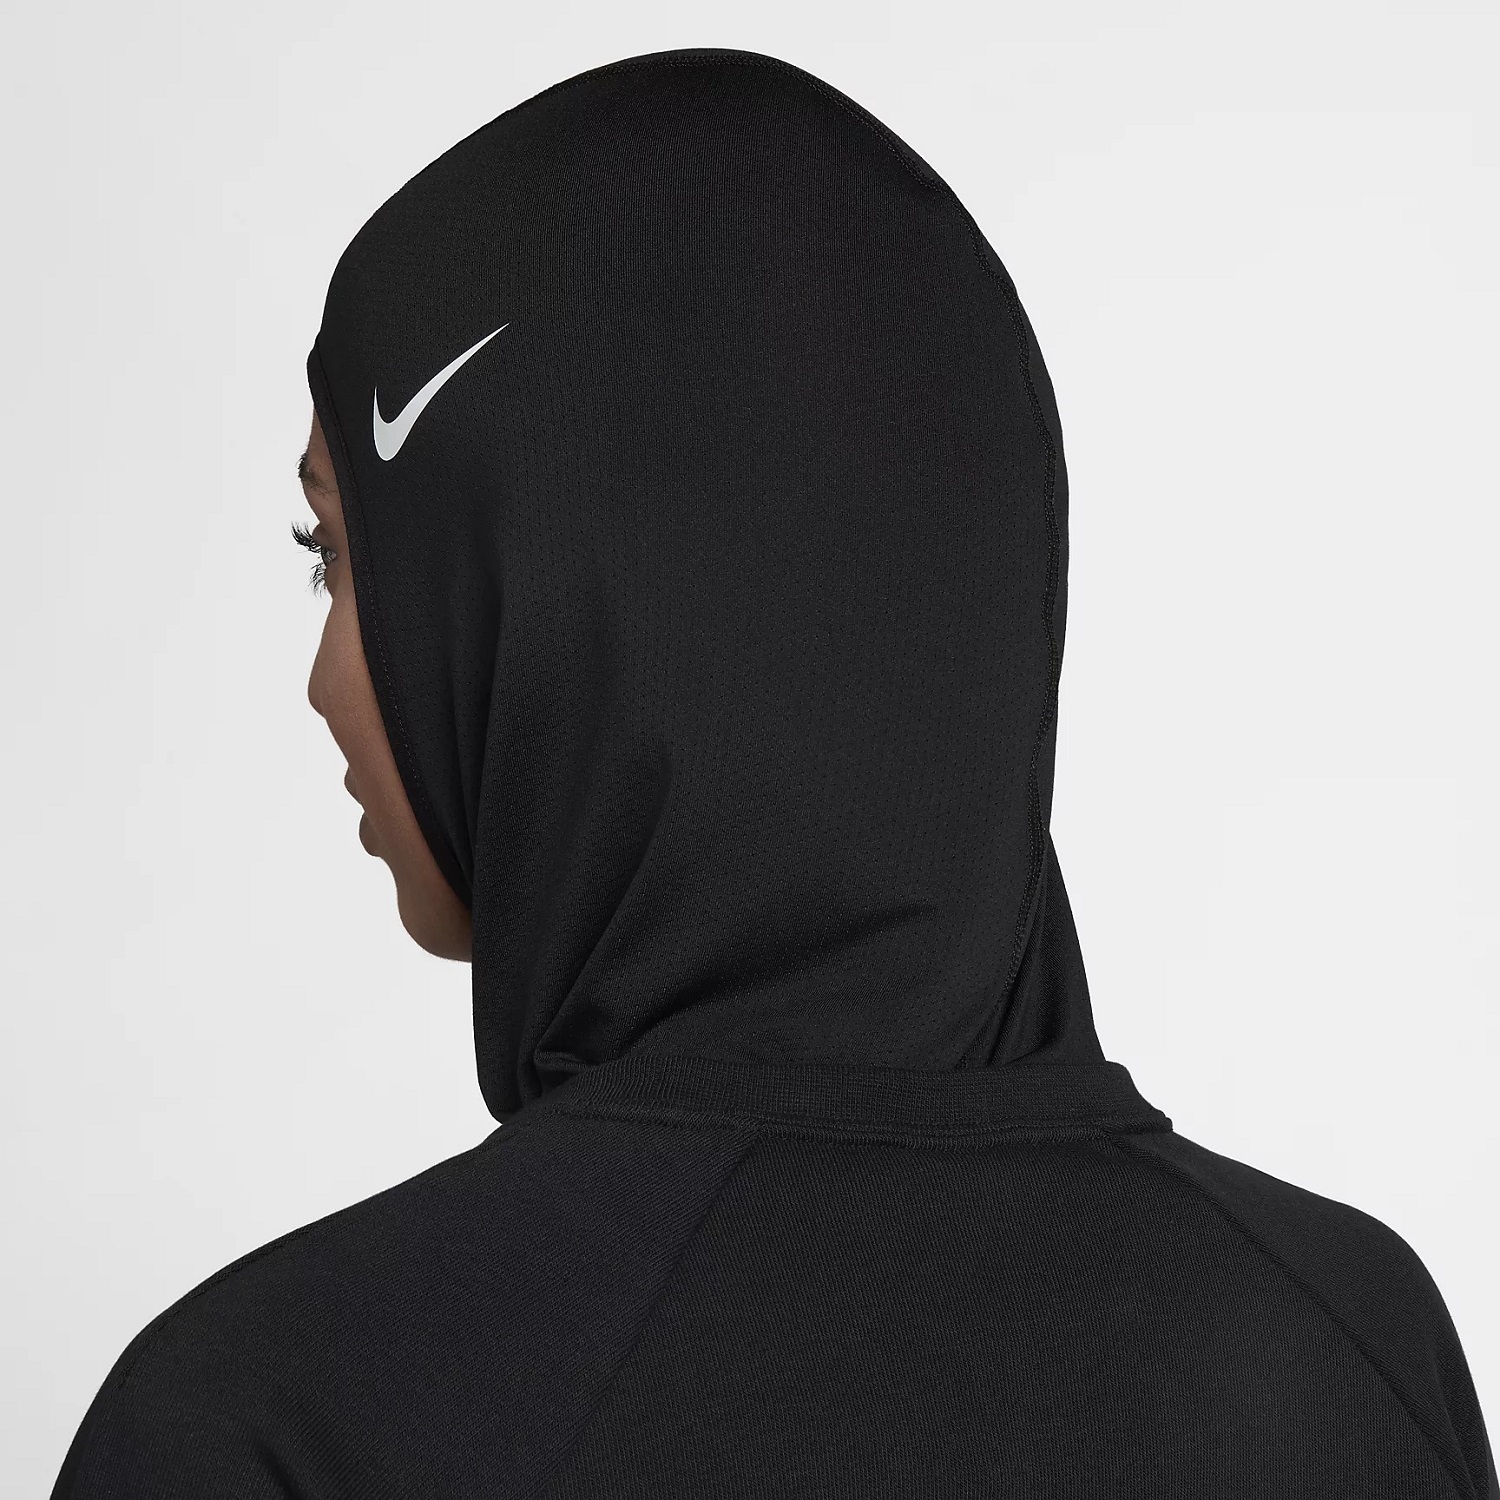  Nike  Pro Hijab  Now Available For Pre Order